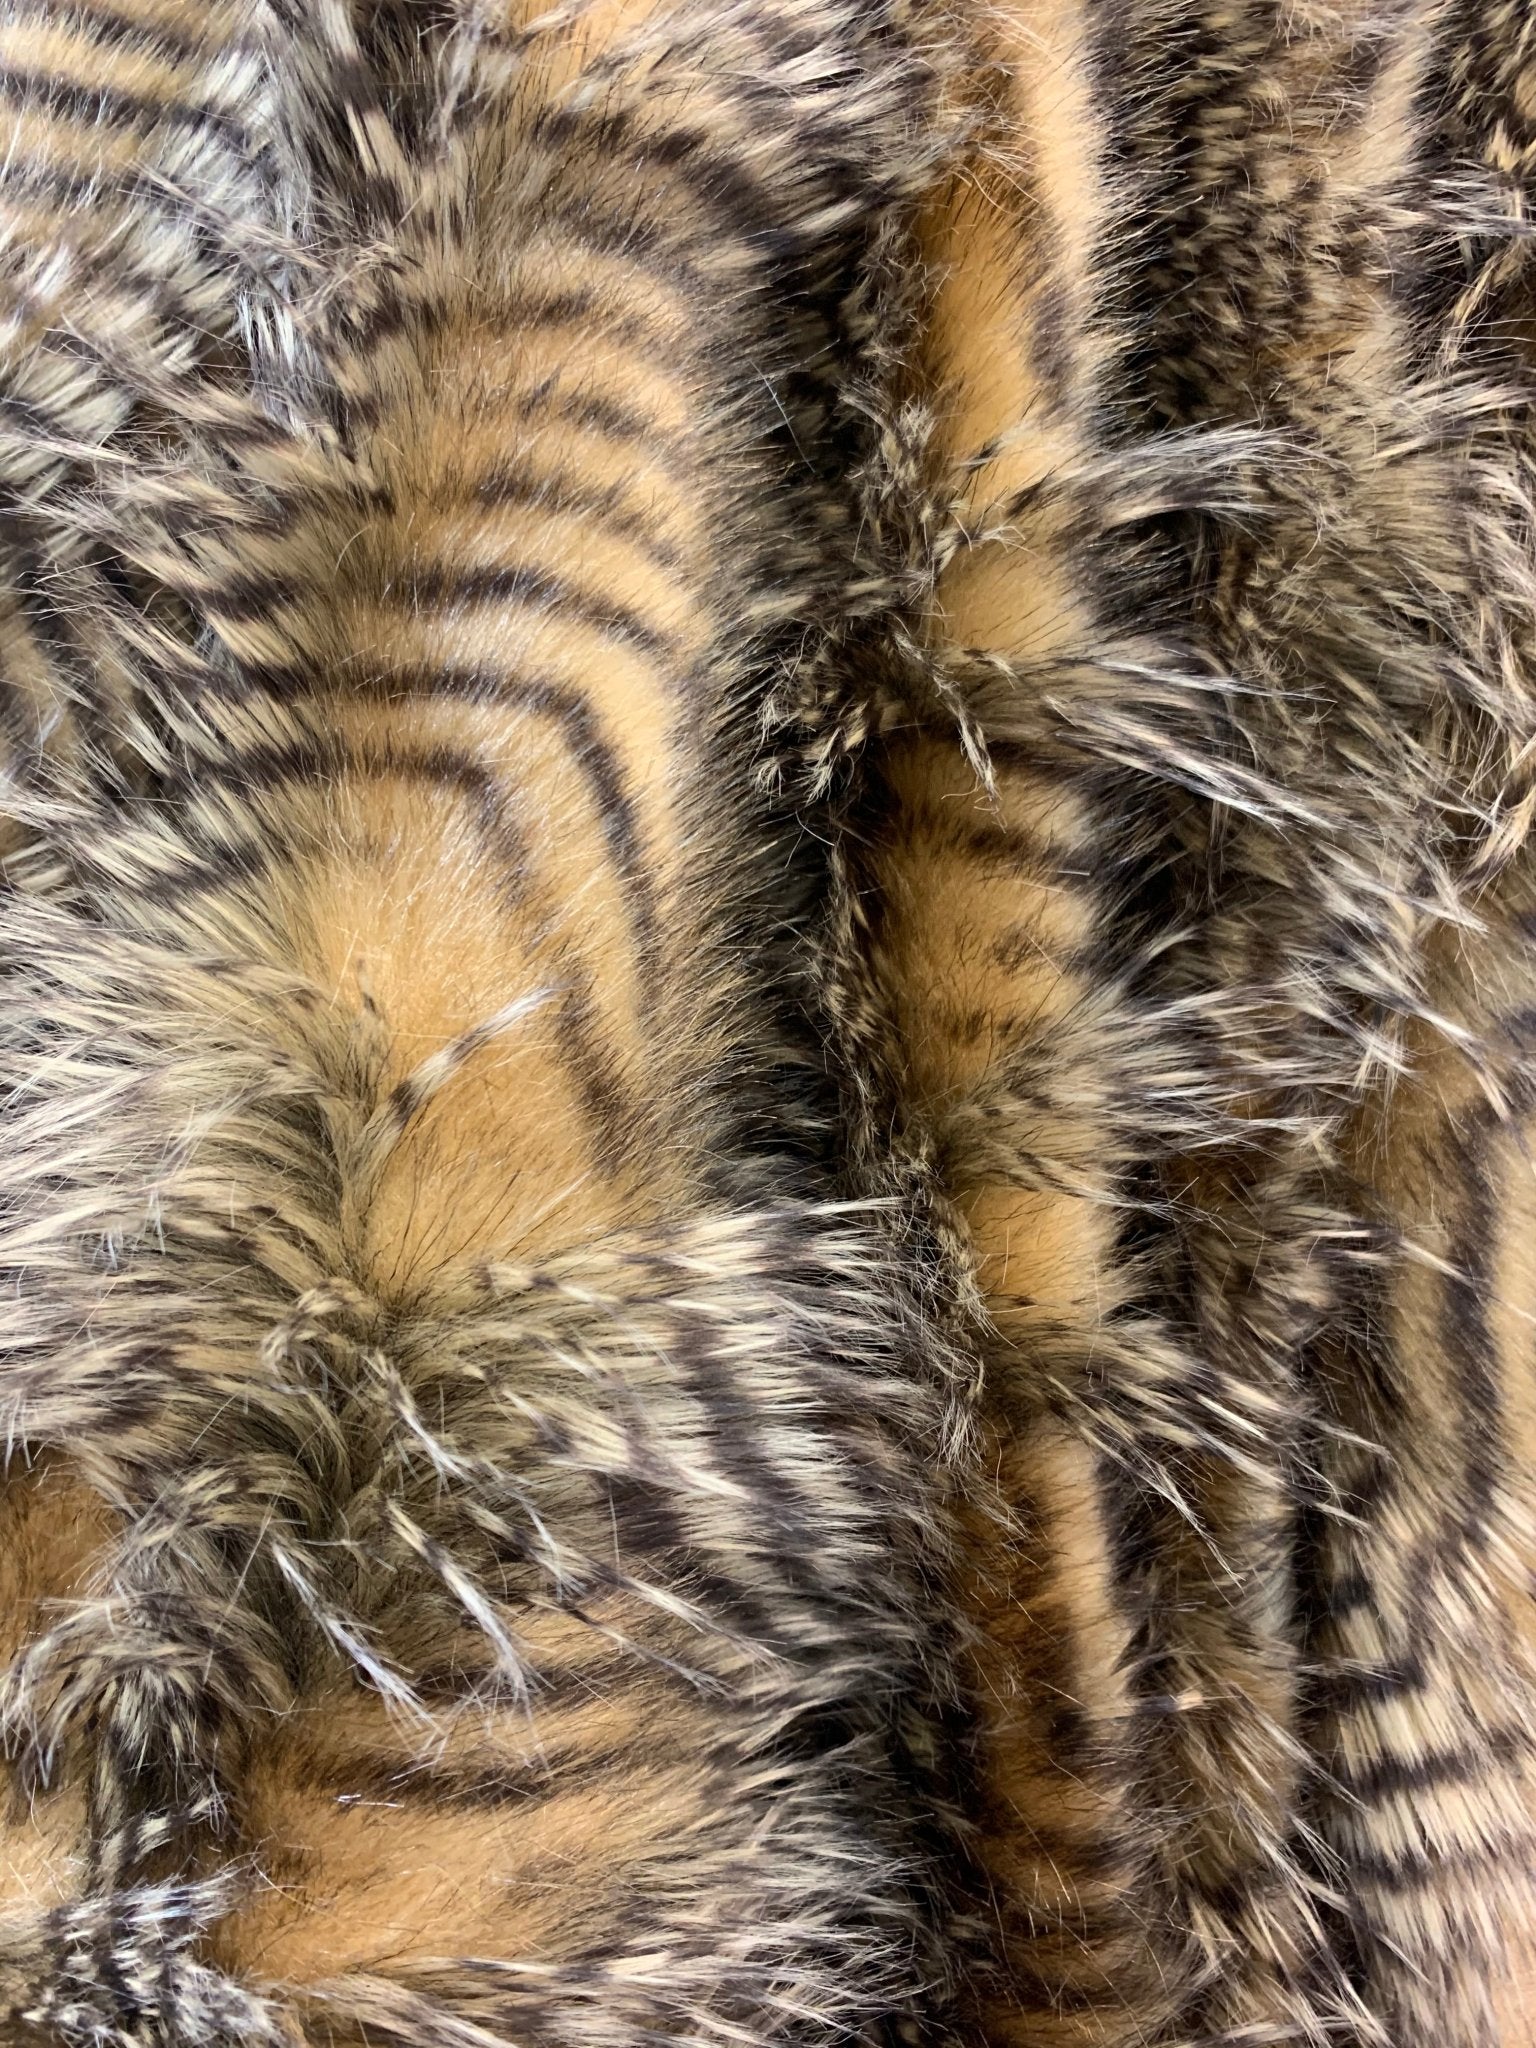 Faux Fake Fur Feathered Bird Long Pile Fabric | Faux Fur MaterialICEFABRICICE FABRICSGoldBy The Yard (60 inches Wide)Faux Fake Fur Feathered Bird Long Pile Fabric | Faux Fur Material ICEFABRIC Gold